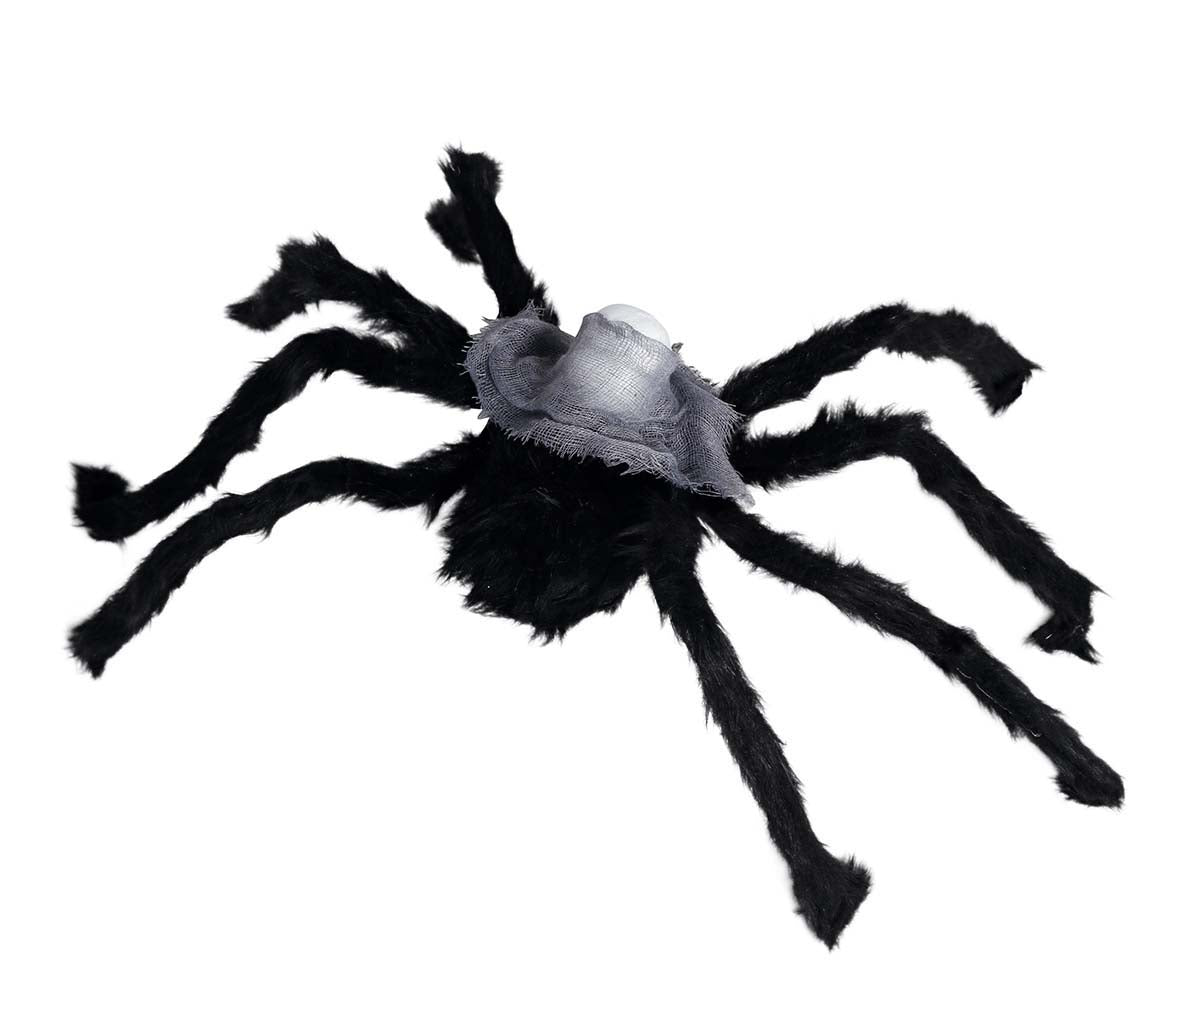 60cm Spider with Skull Head